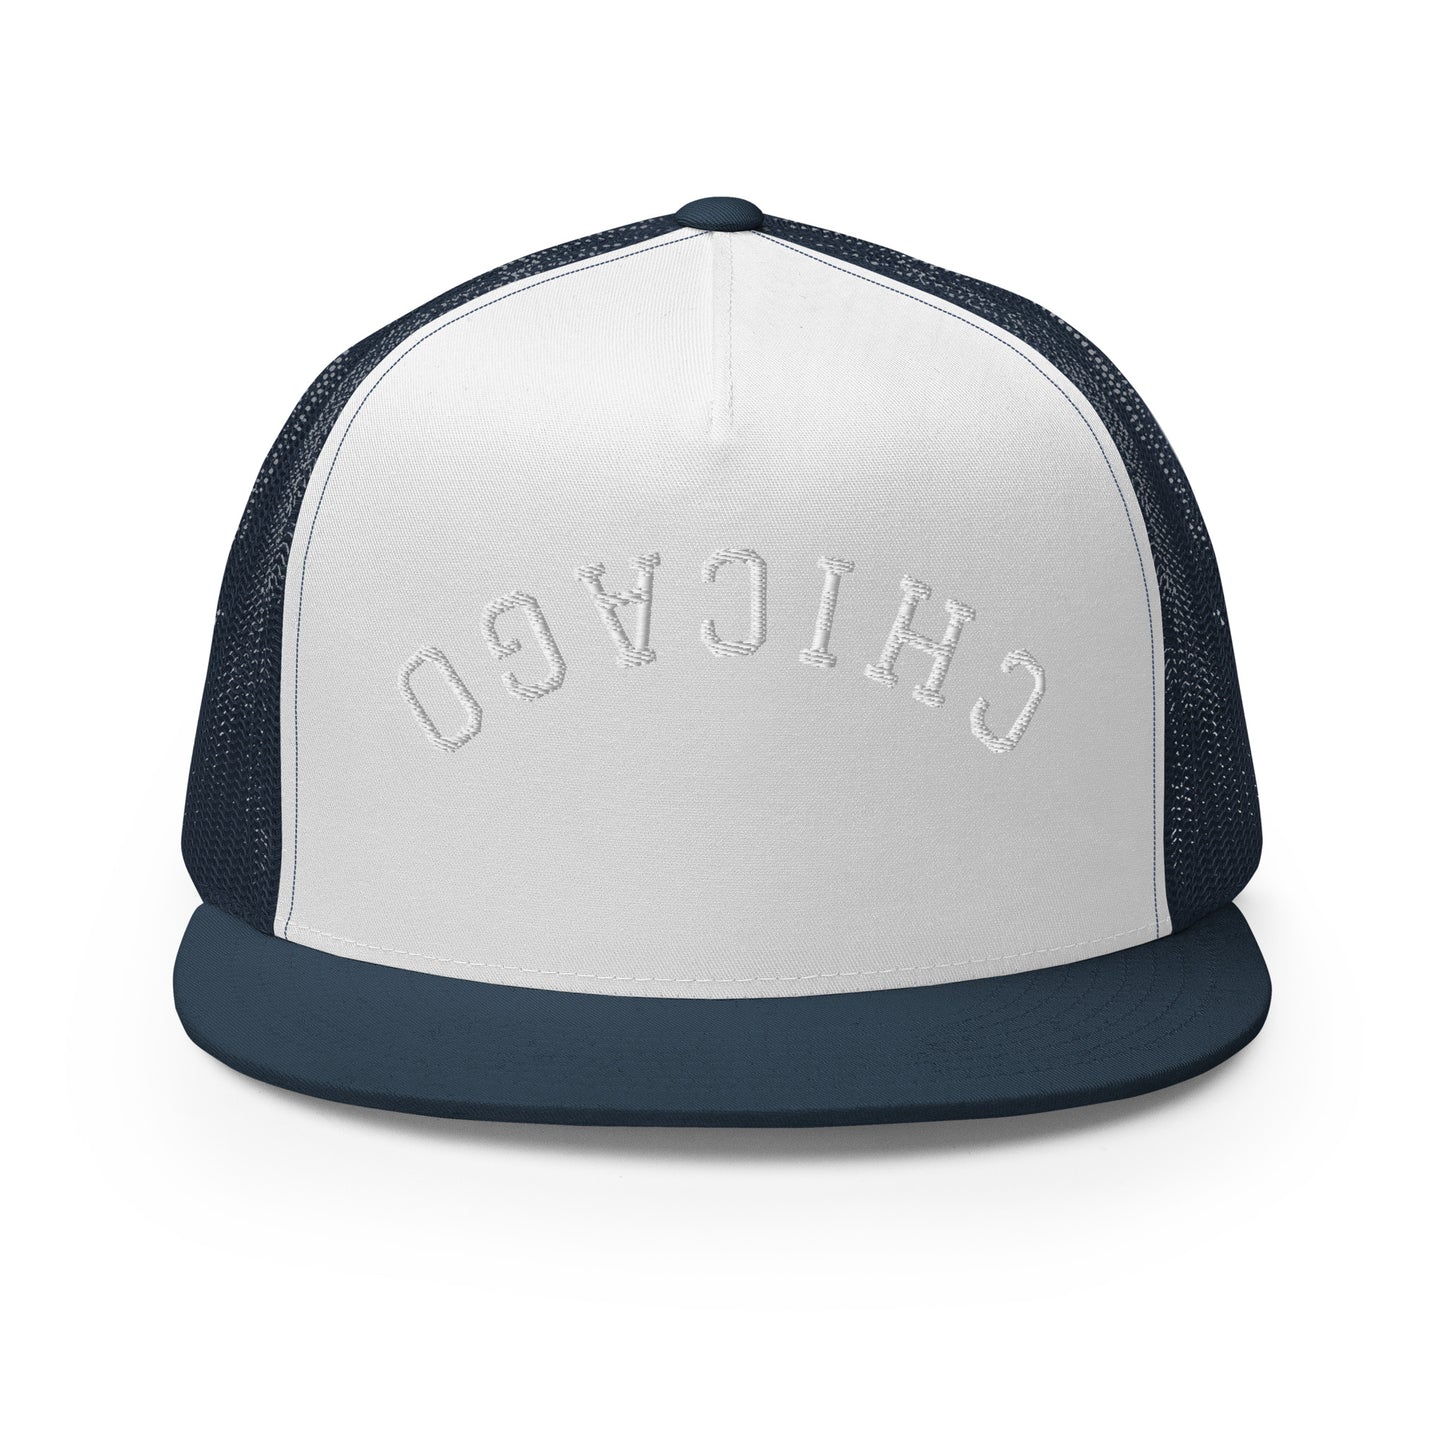 Chicago Upside Down Arch High 5 Panel A-Frame Snapback Trucker Hat